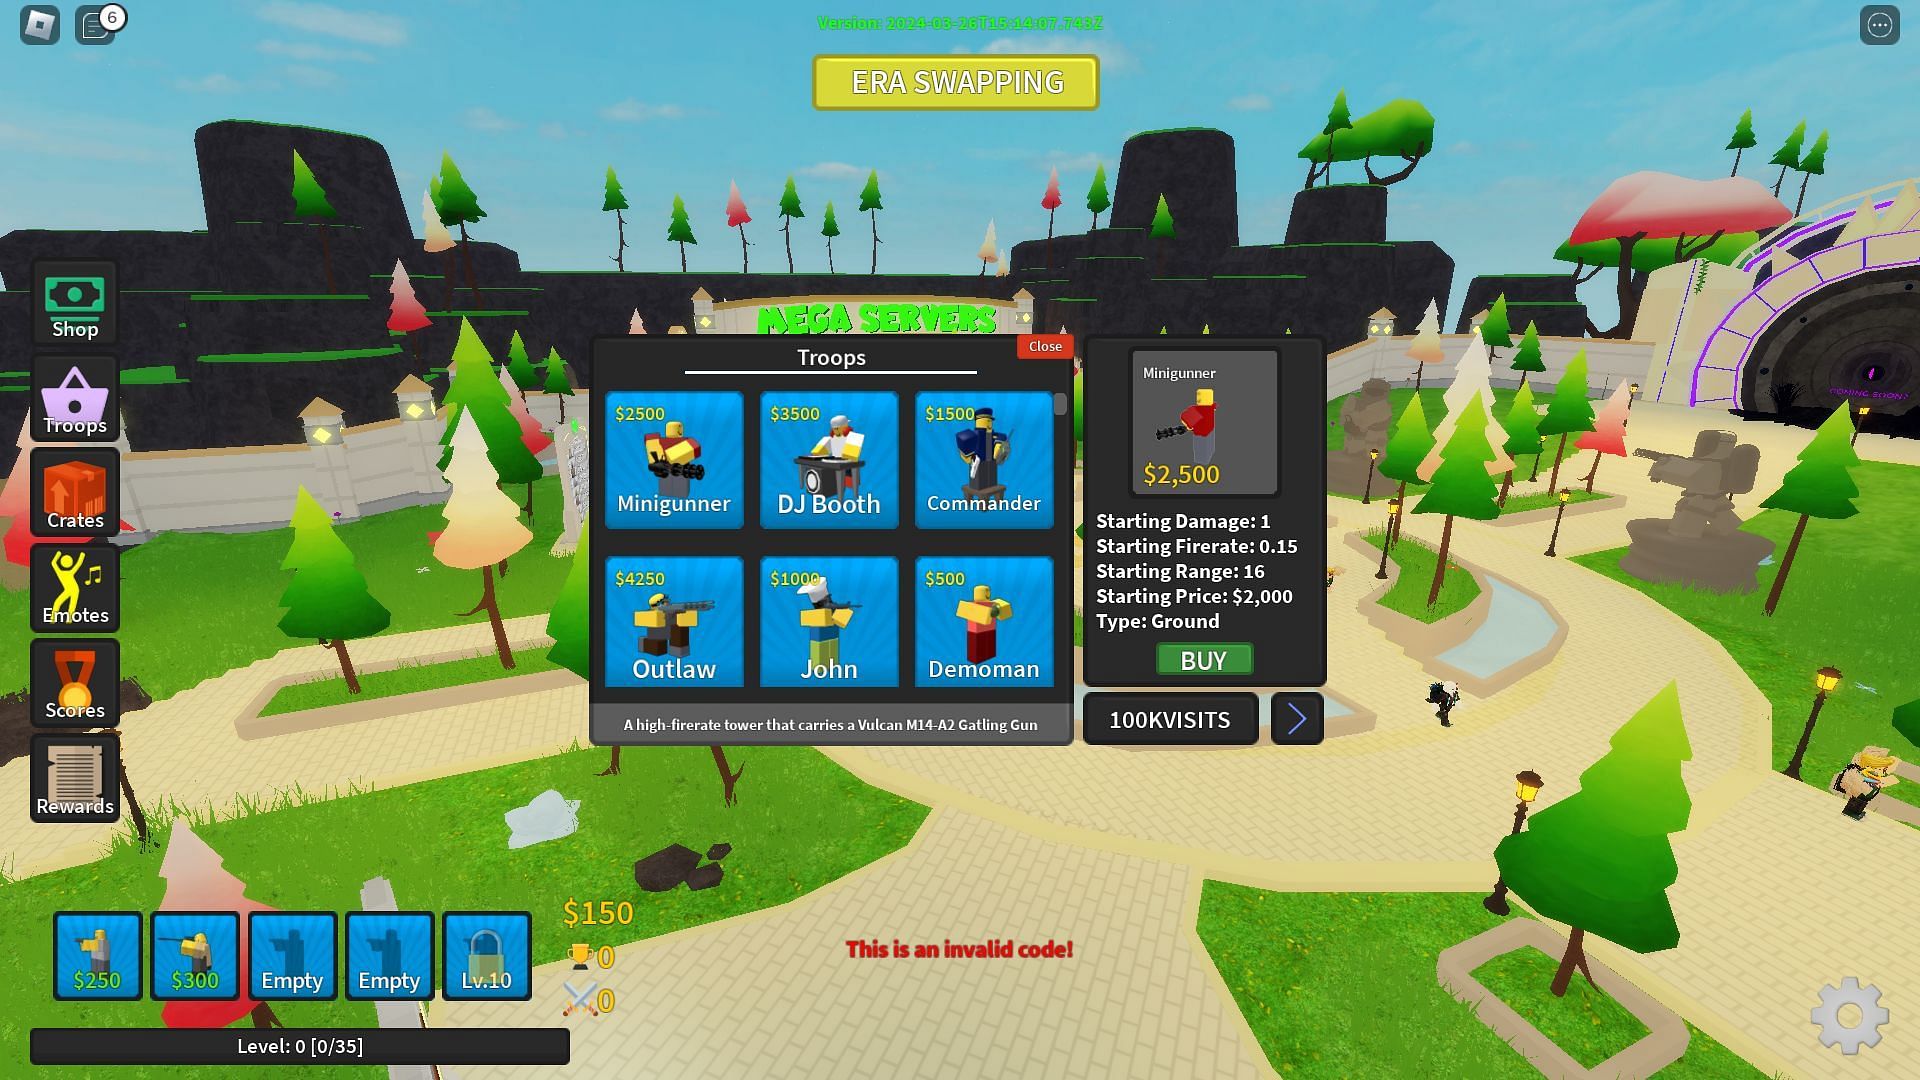 Troubleshooting codes for TDS: Legacy (Image via Roblox)